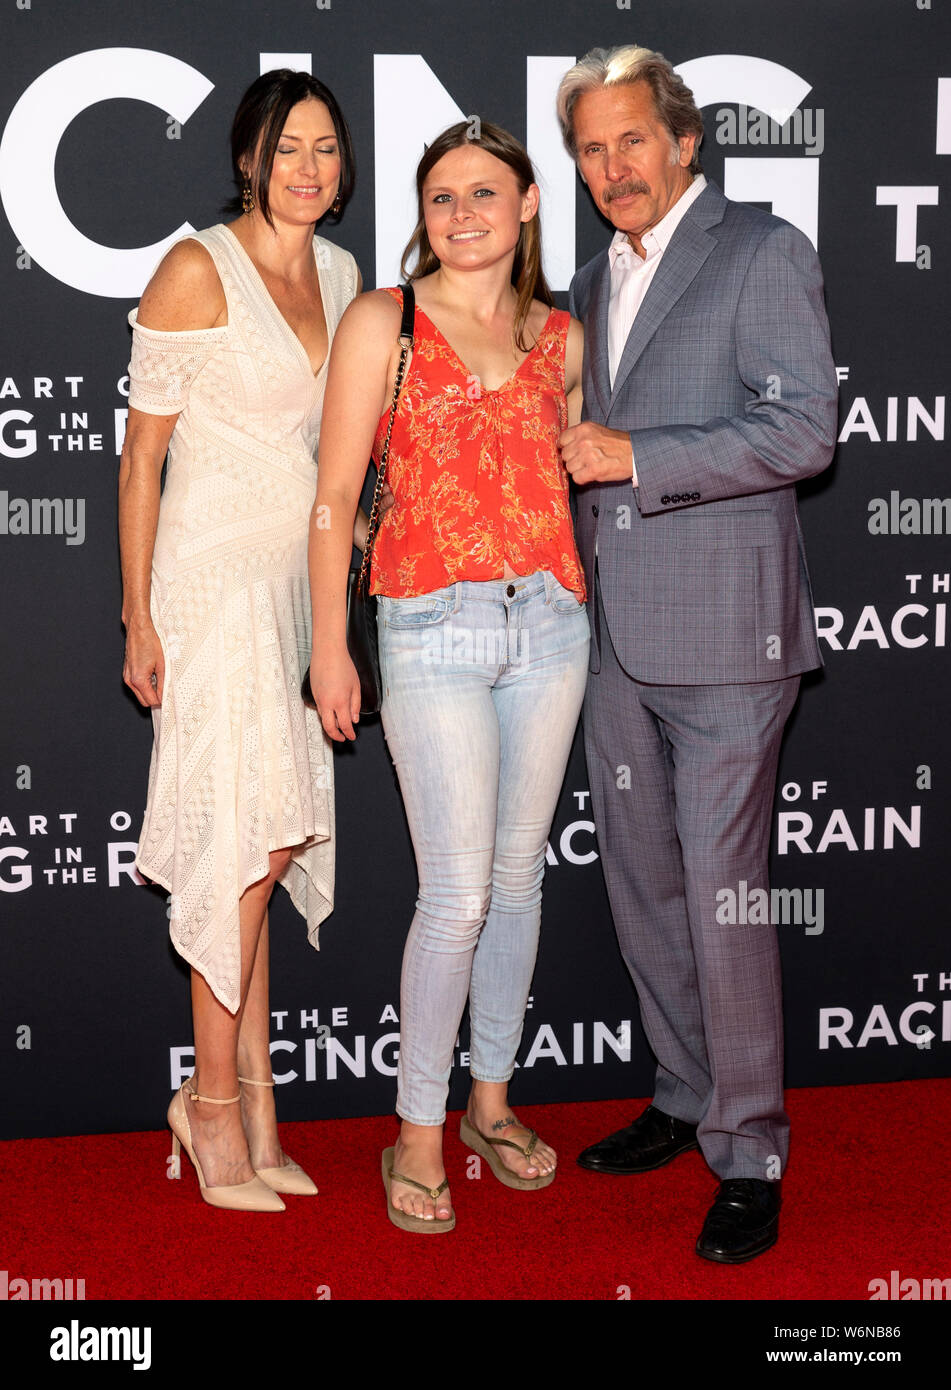 Los Angeles, CA - August 01, 2019: Gary Cole (R) and daughter Mary Cole (C)  attend the premiere Of  'The Art of Racing in the Rain' held at El Capita Stock Photo